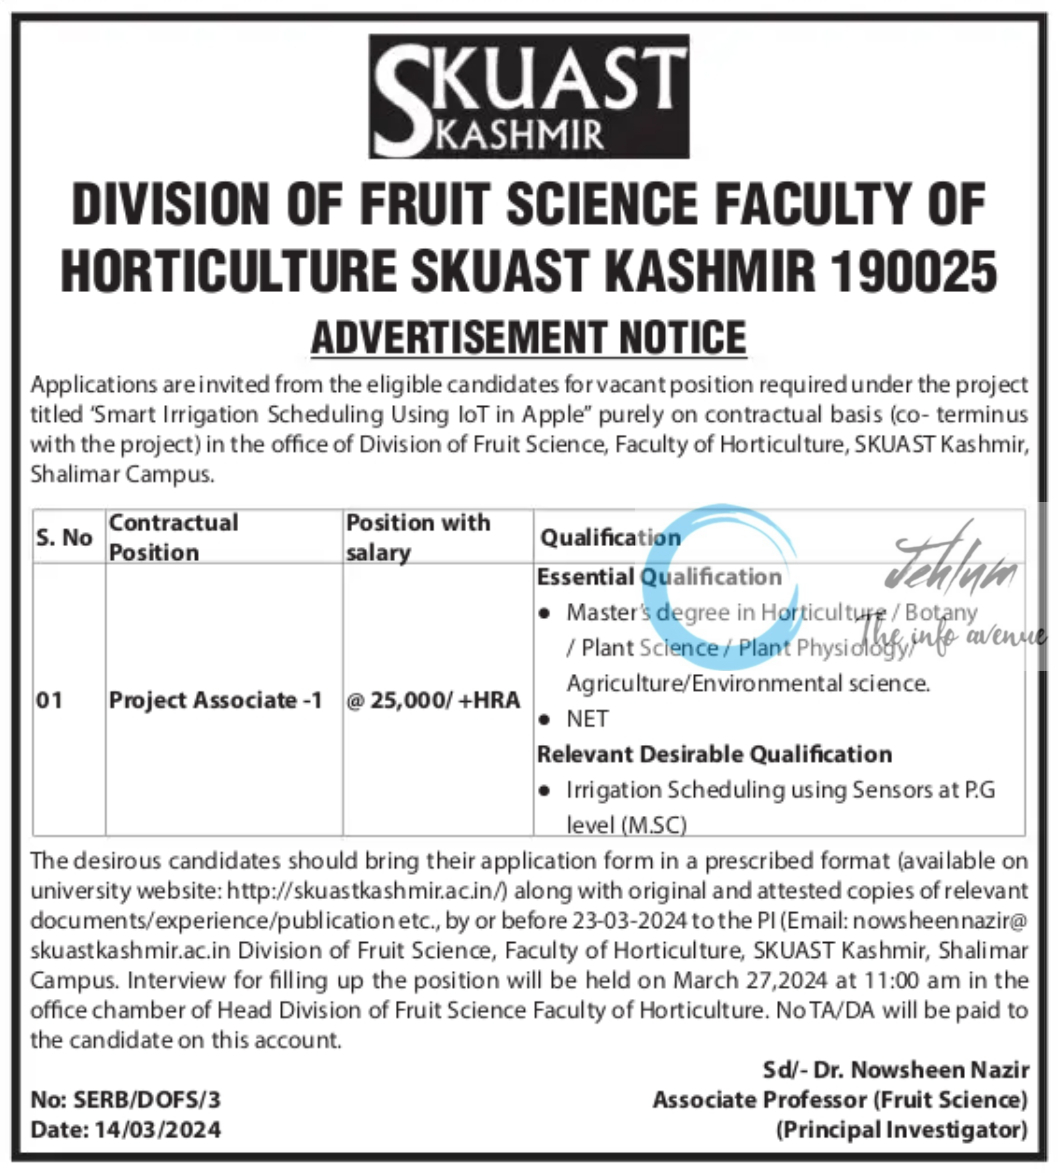 SKUAST KASHMIR DIVISION OF FRUIT SCIENCE FACULTY OF HORTICULTURE ADVERTISEMENT NOTICE 2024